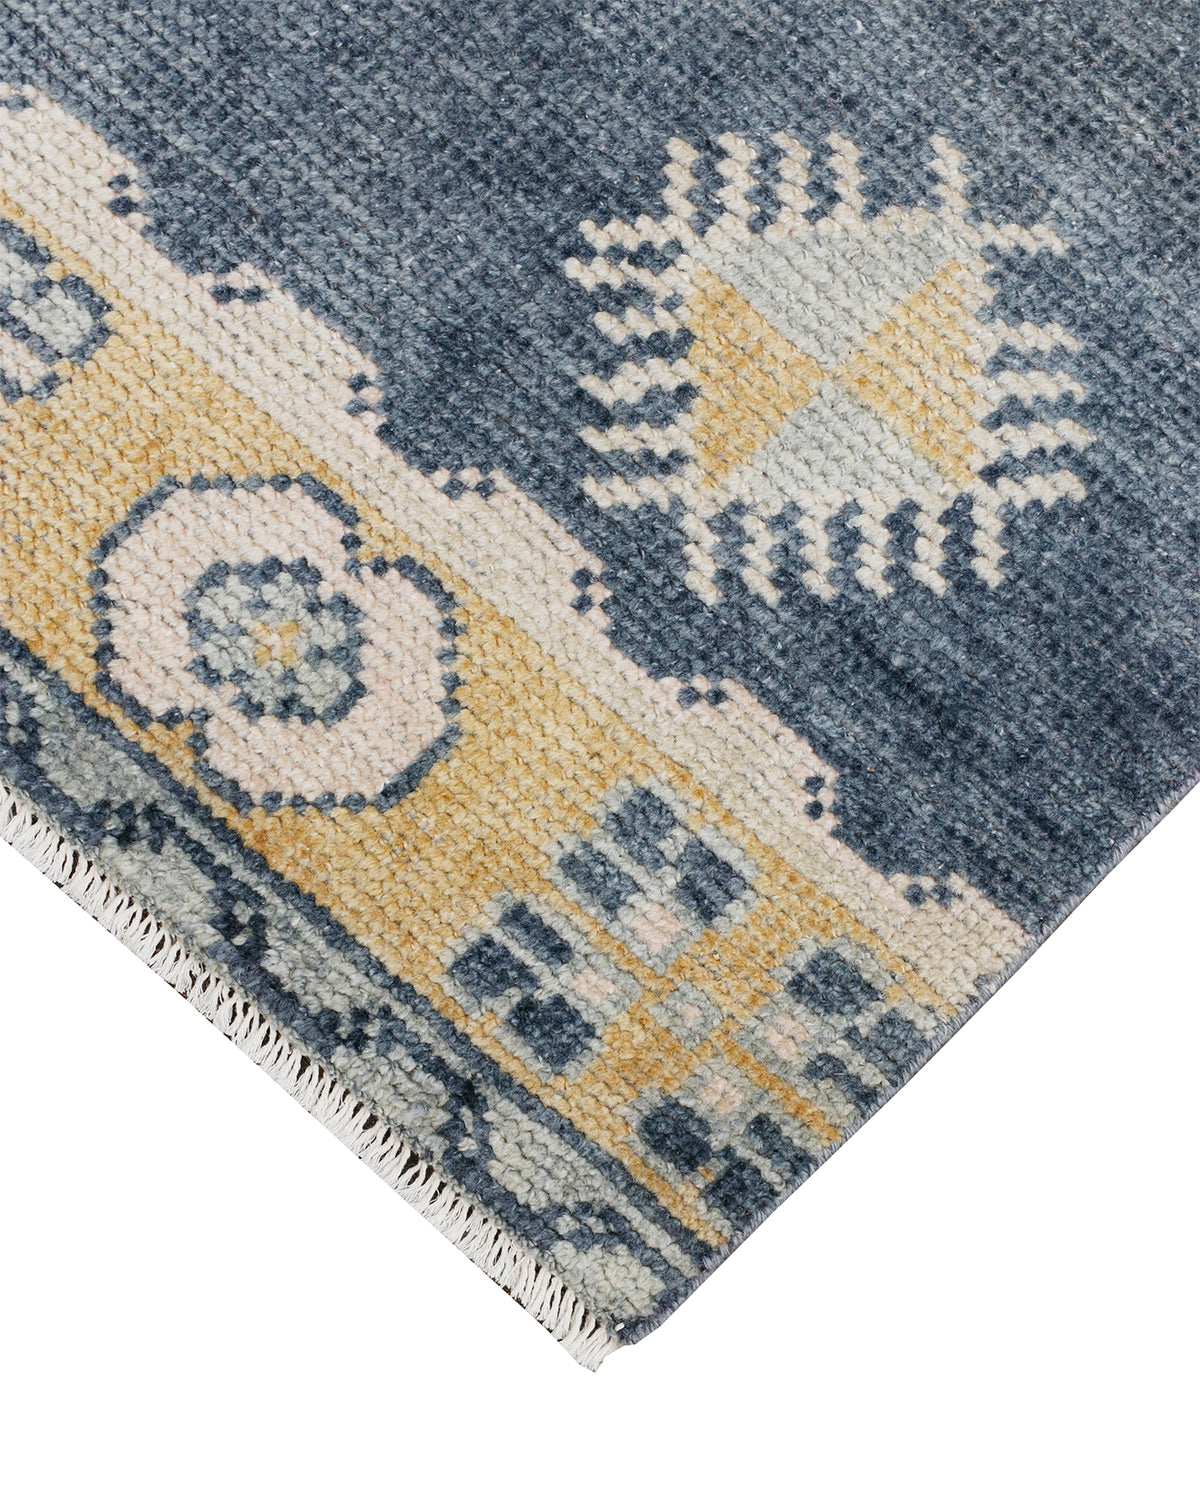 Transitional Hand-knotted Rug (M-28)